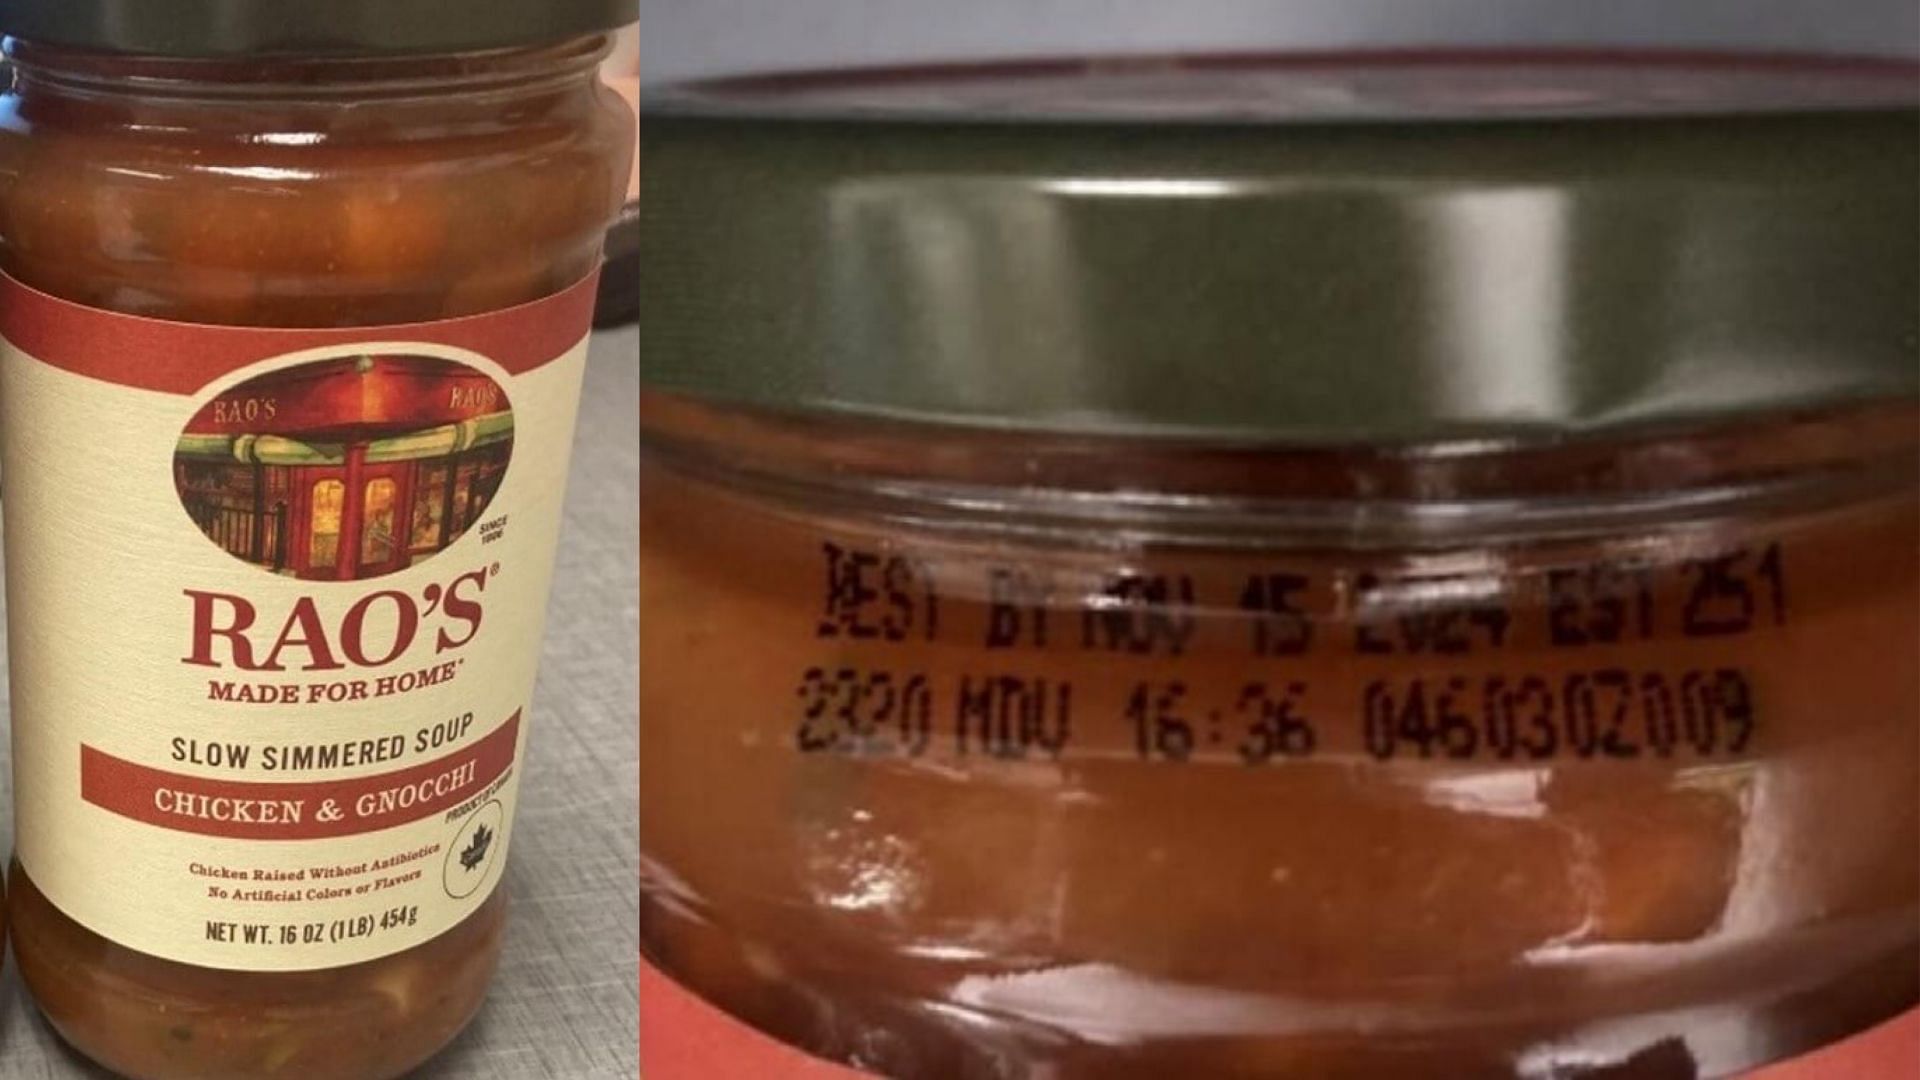 Pictures of the recalled Rao&rsquo;s Slow Simmered Chicken &amp; Gnocchi soup jars that are filled with egg-containing vegetable minestrone (Image via FDA)